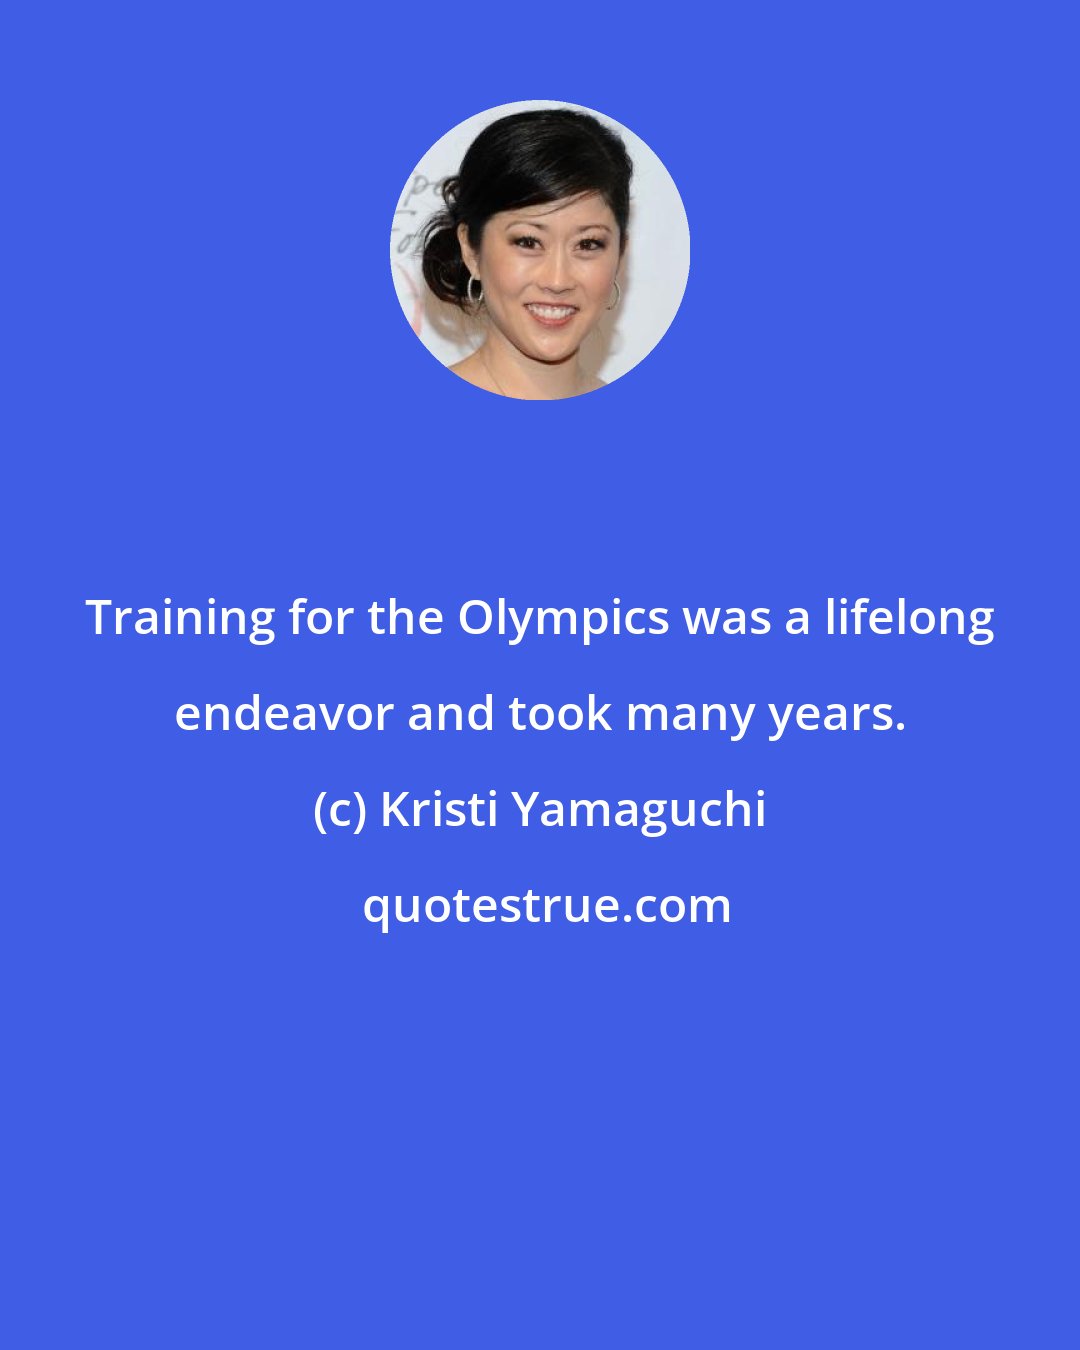 Kristi Yamaguchi: Training for the Olympics was a lifelong endeavor and took many years.